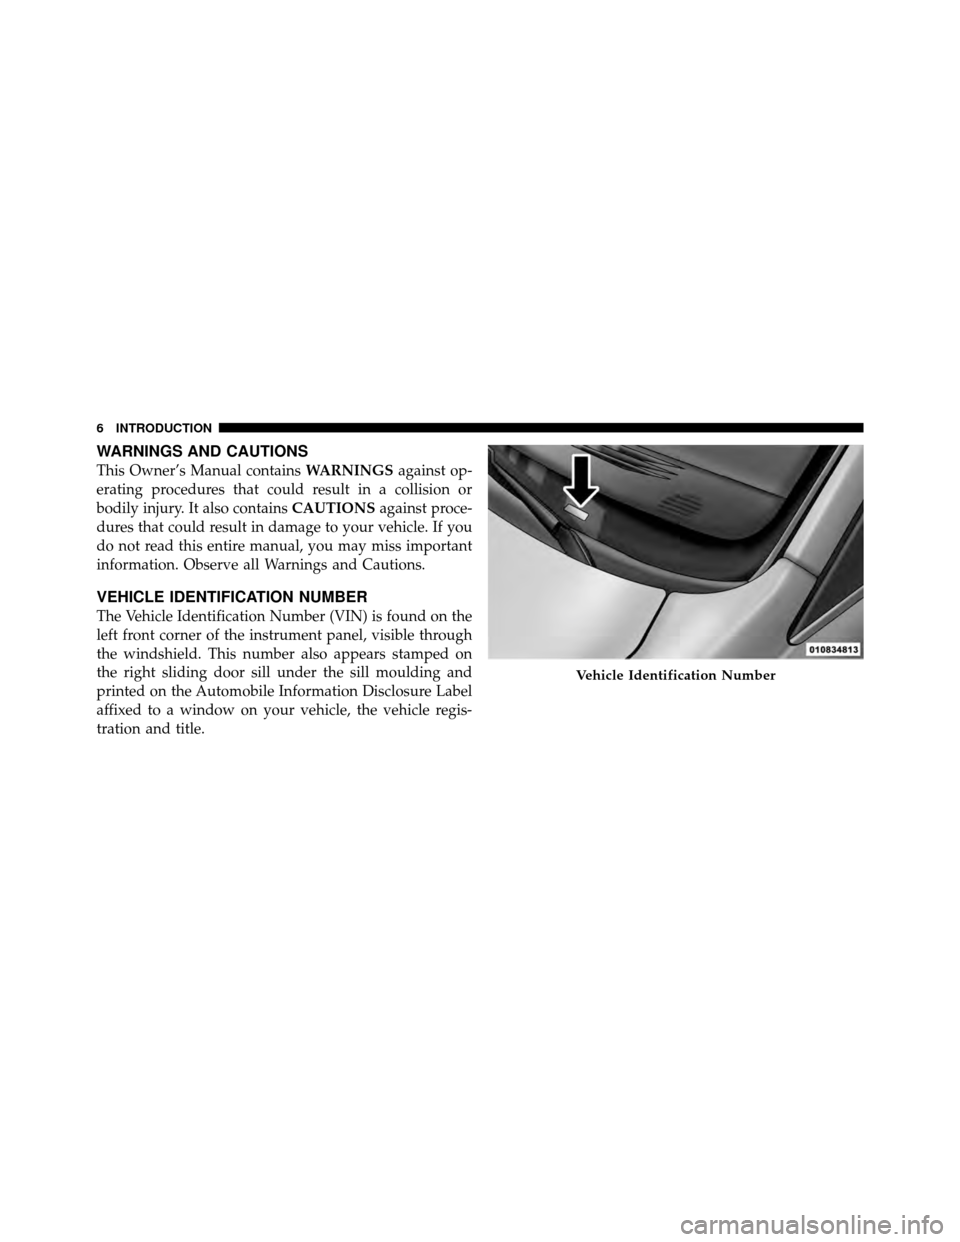 Ram Cargo Van 2012  Owners Manual WARNINGS AND CAUTIONS
This Owner’s Manual containsWARNINGSagainst op-
erating procedures that could result in a collision or
bodily injury. It also contains CAUTIONSagainst proce-
dures that could r